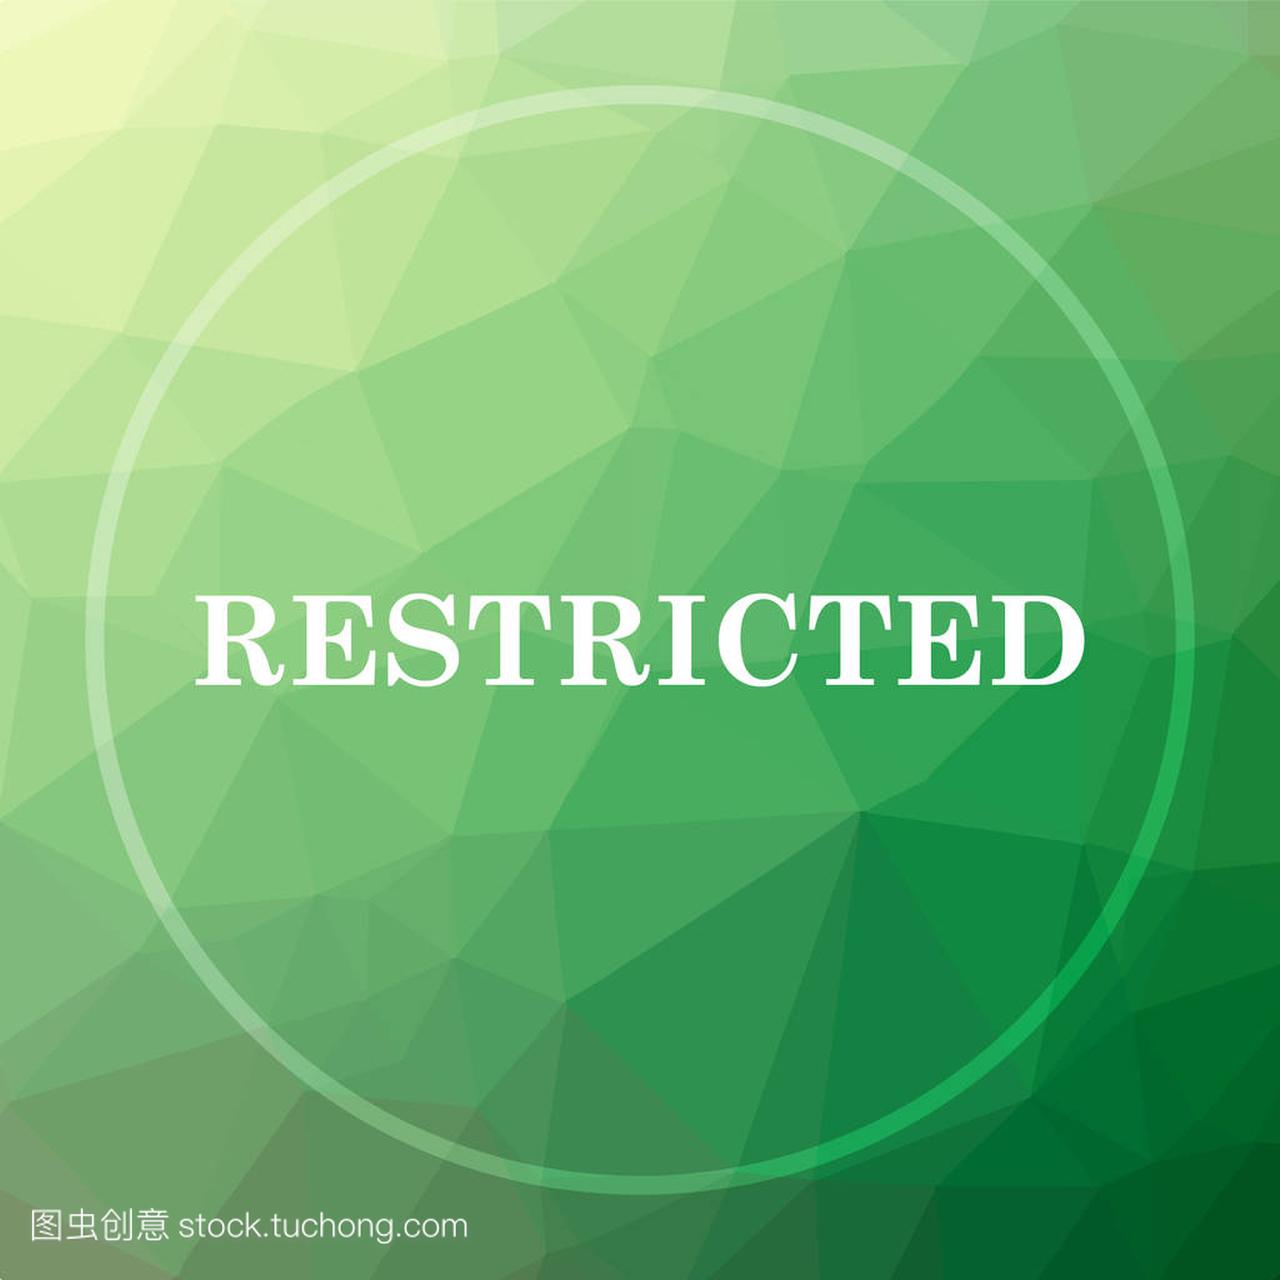 Restricted icon. Restricted website button on g